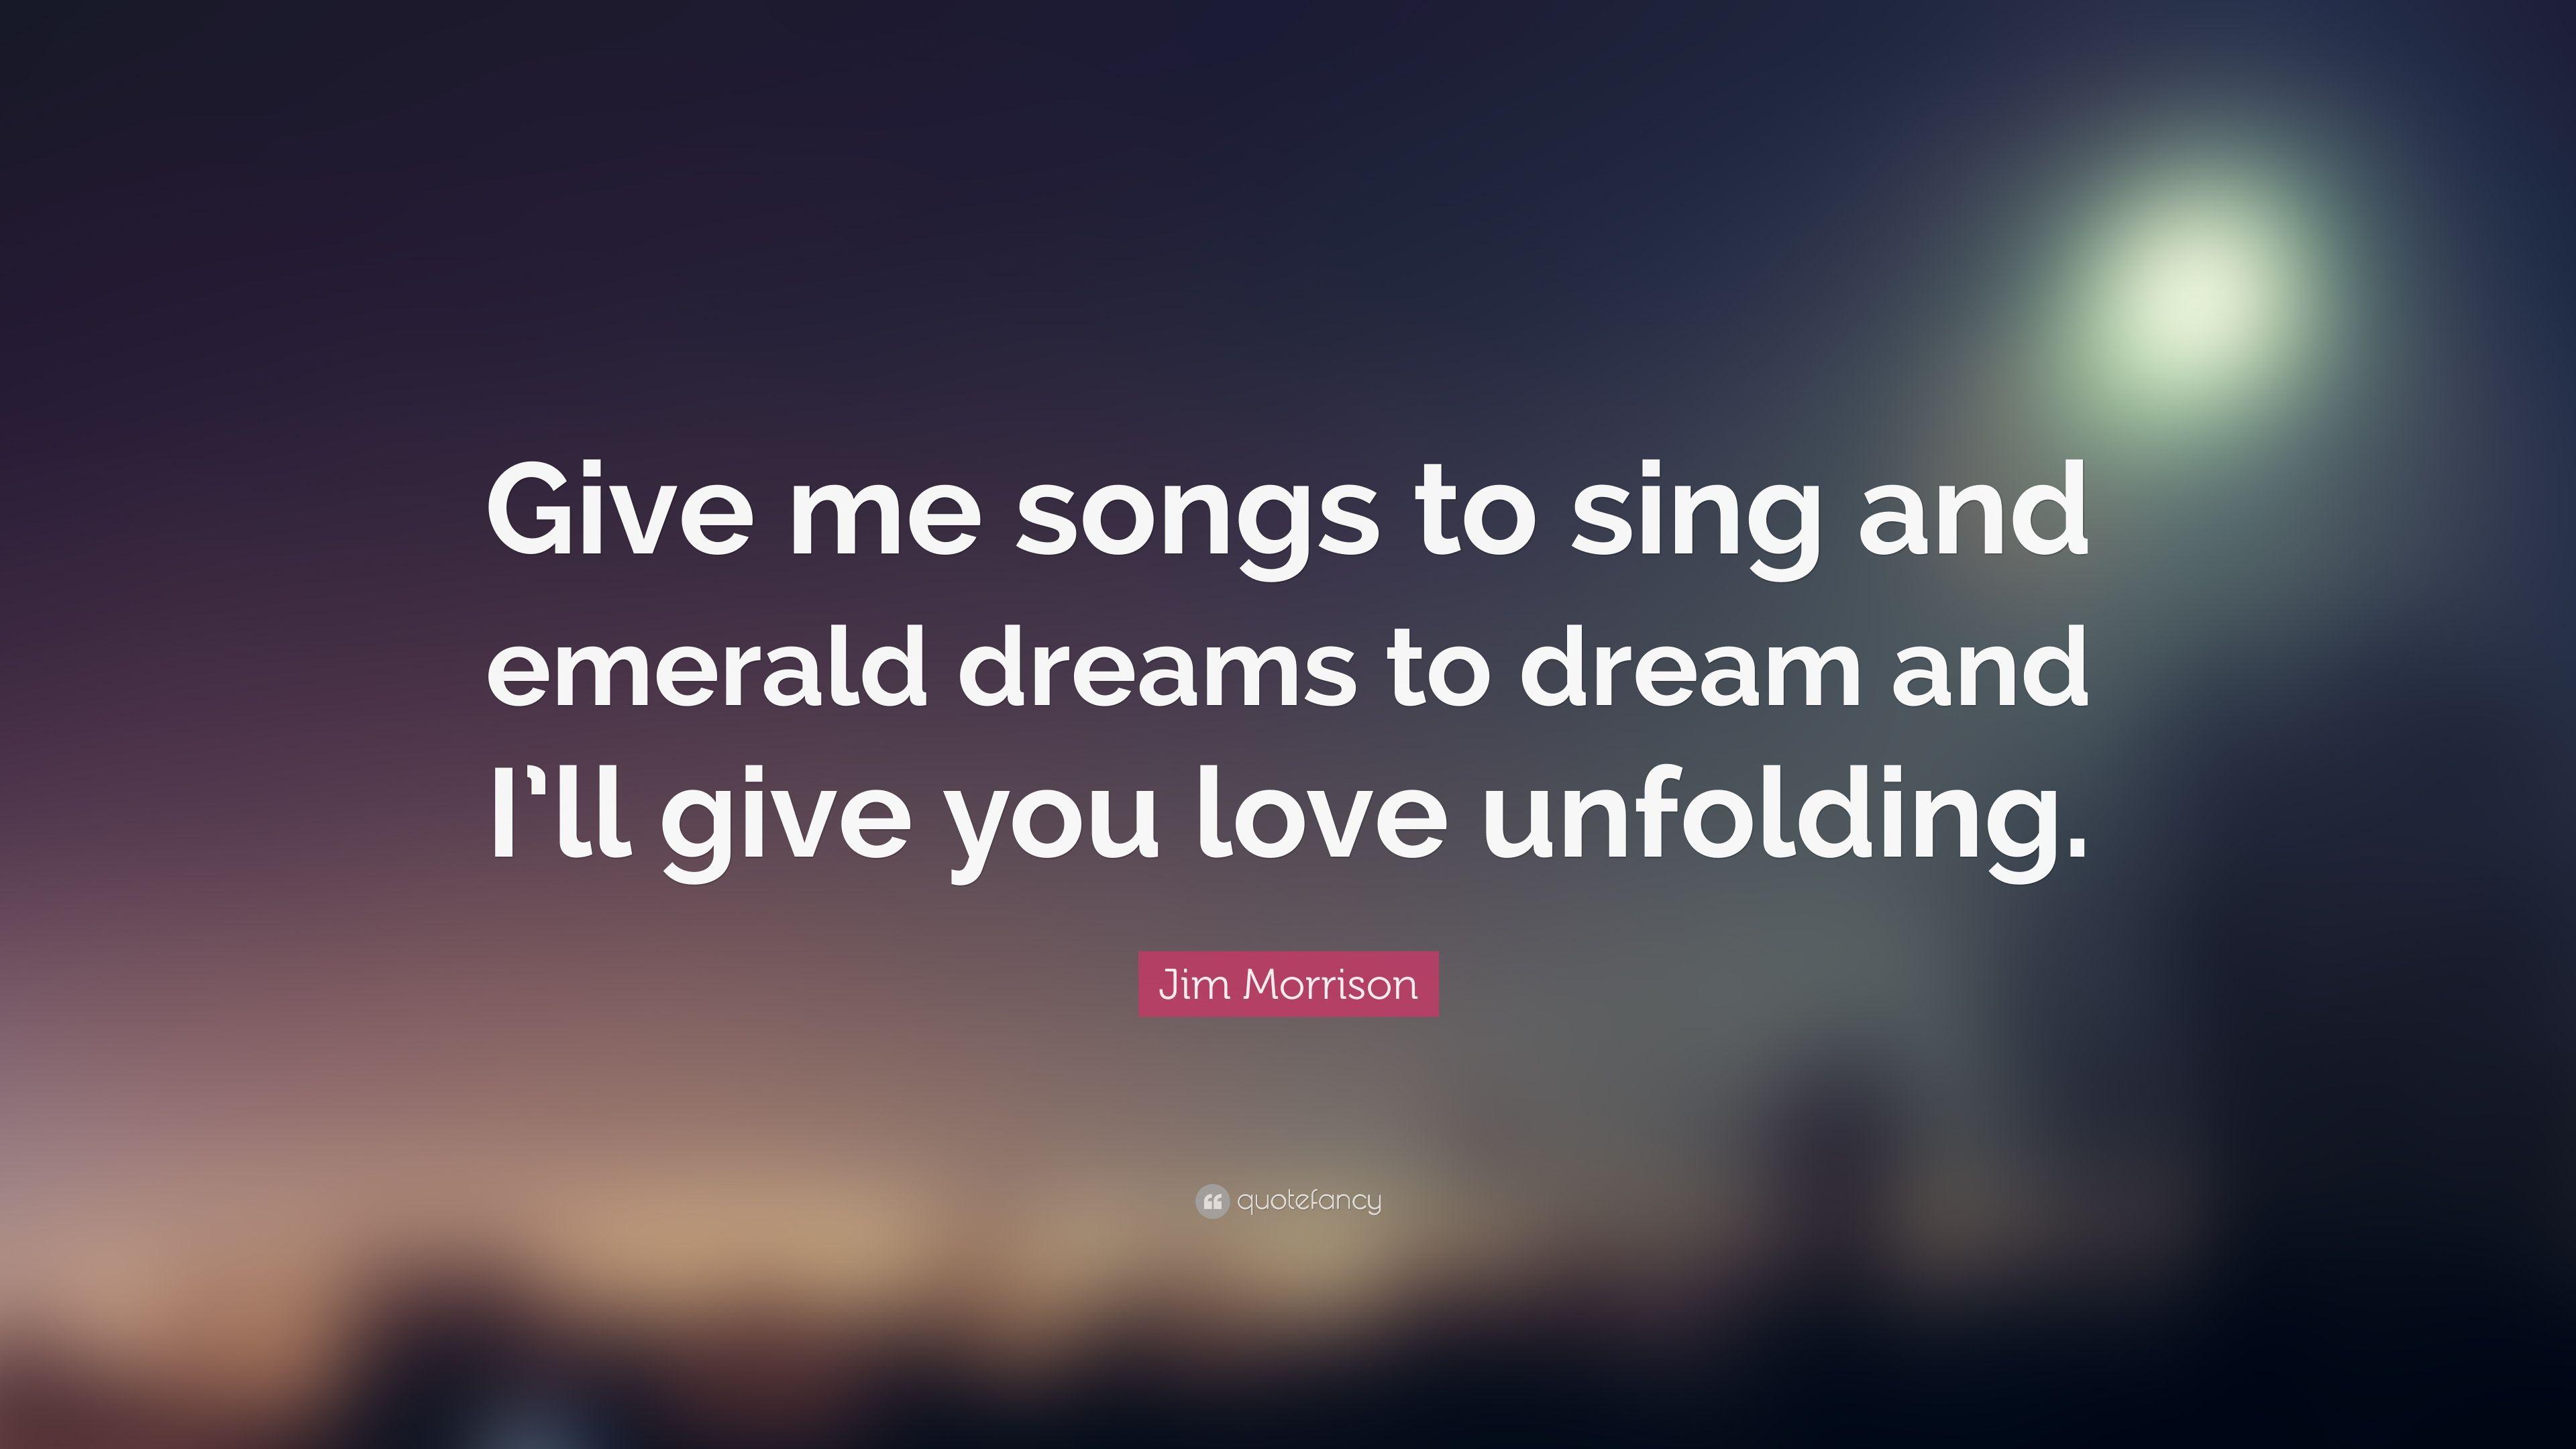 Jim Morrison Quote: “Give me songs to sing and emerald dreams to